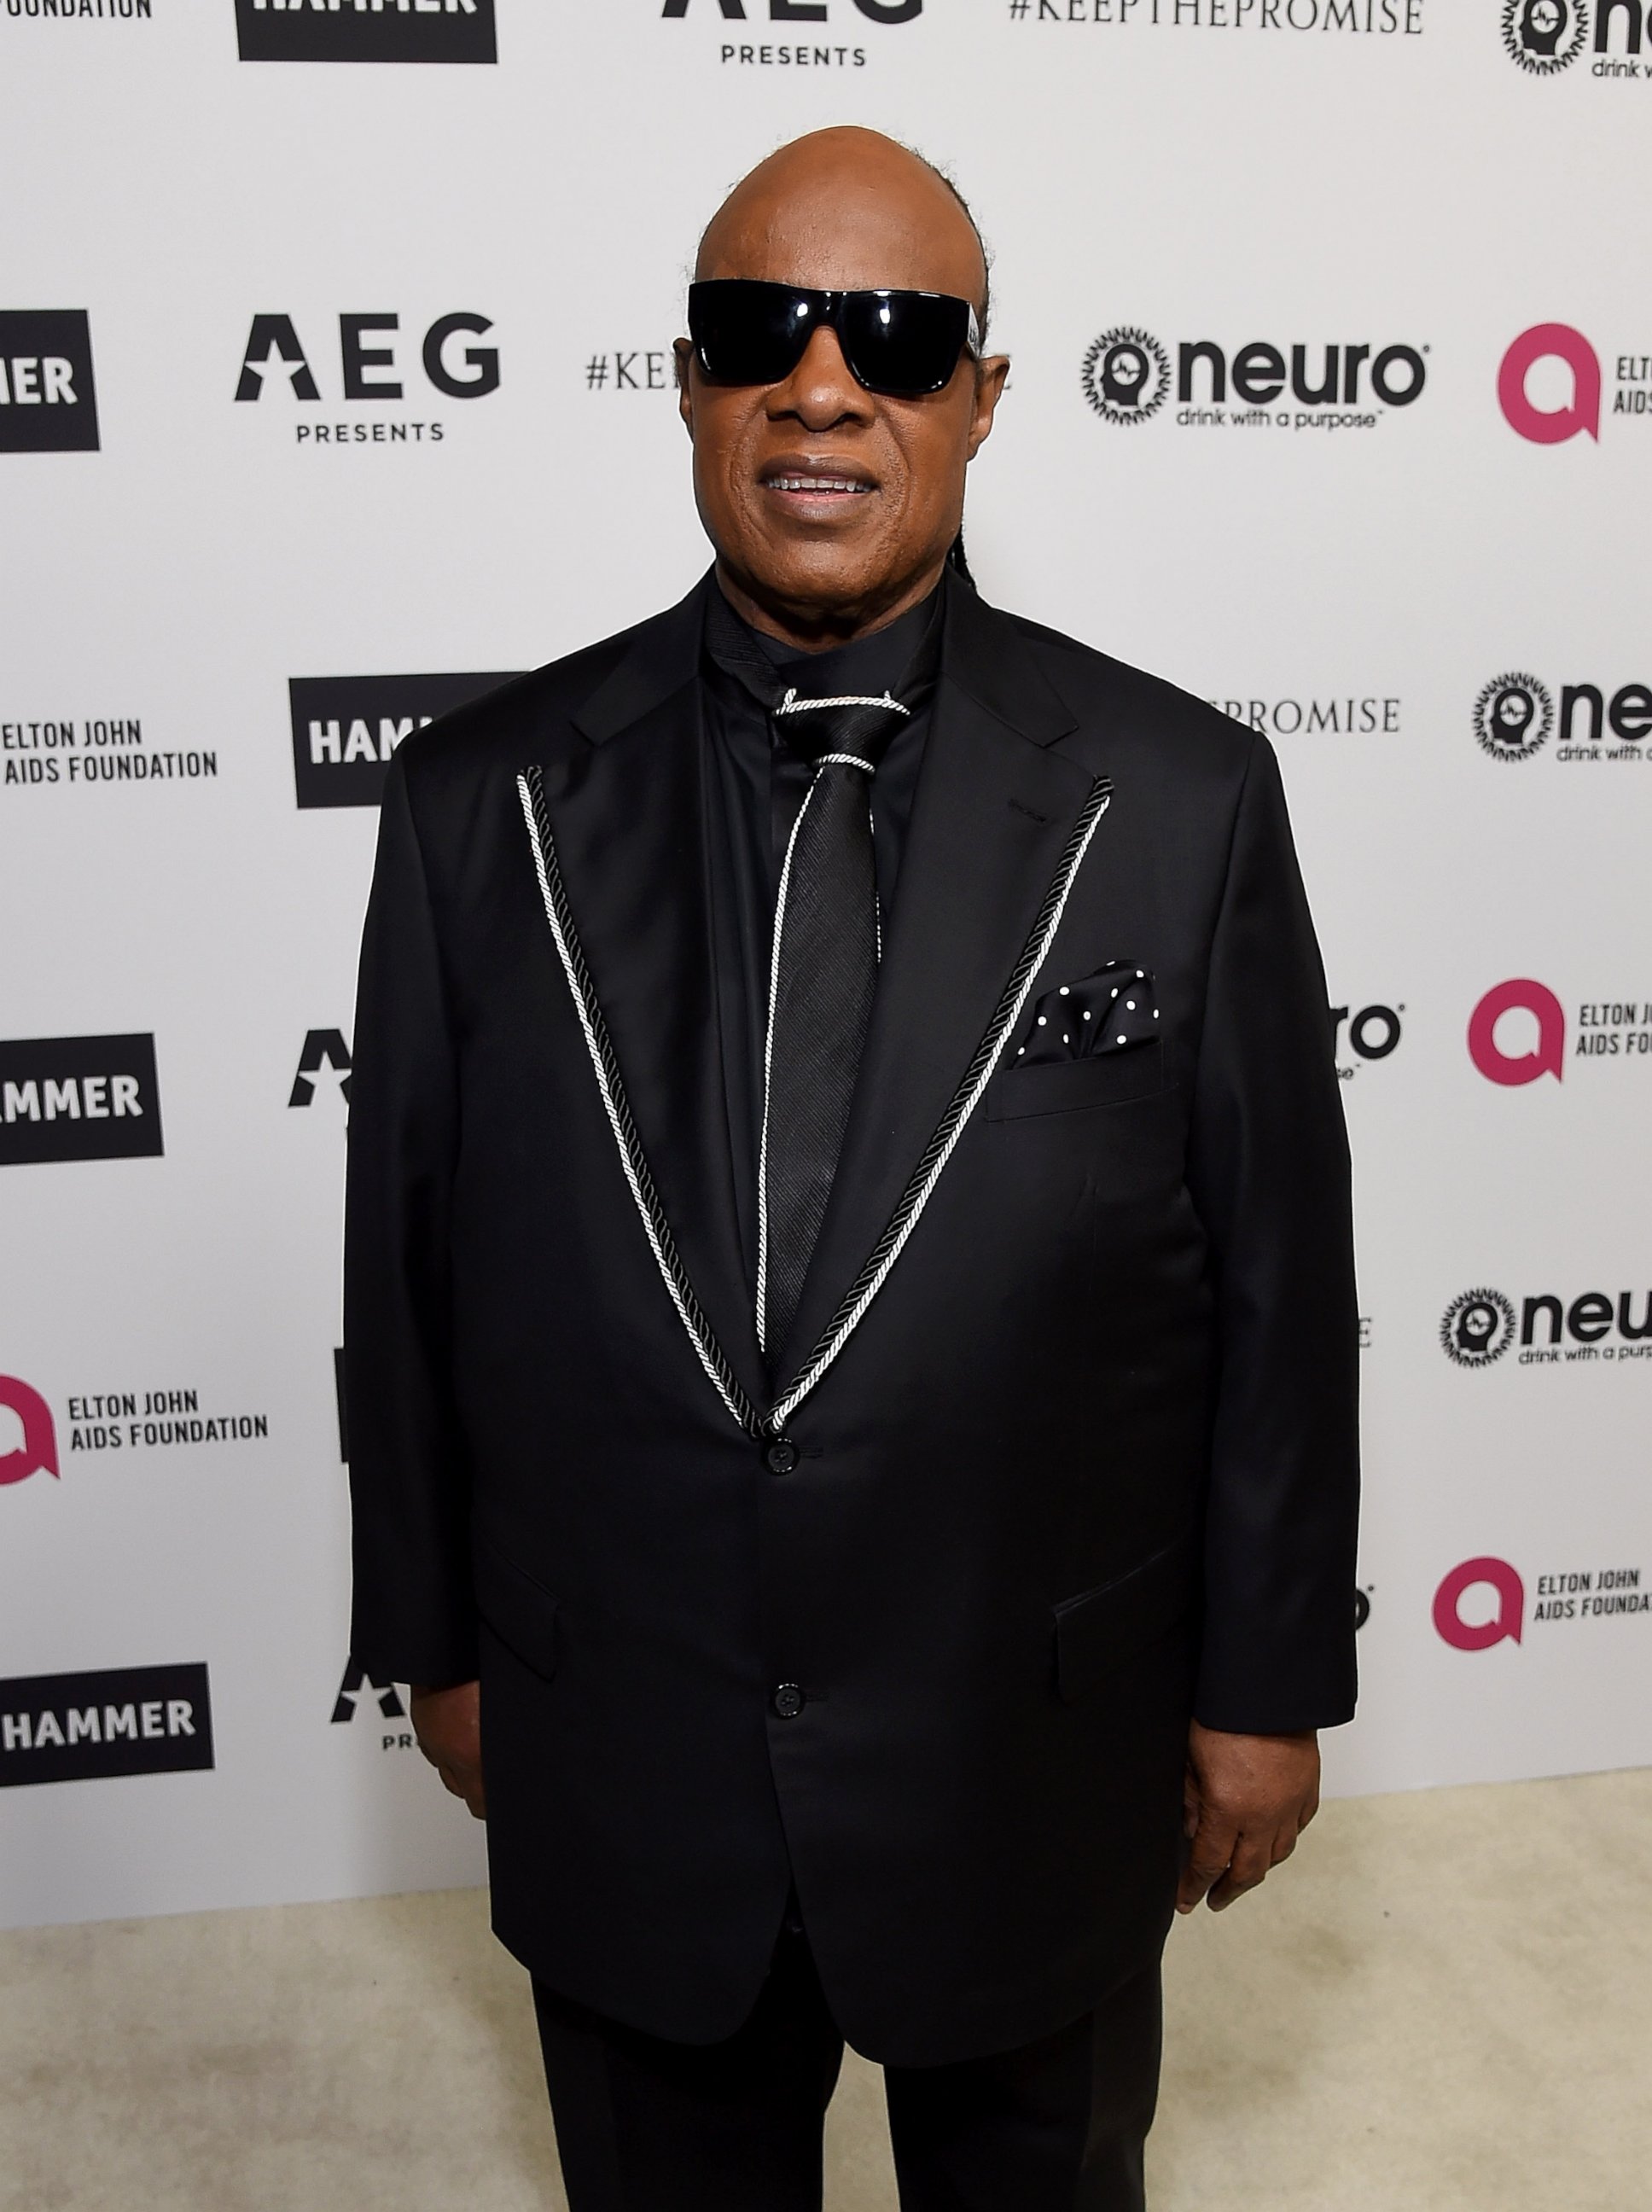 PHOTO: Musician Stevie Wonder celebrates Elton John's 70th Birthday and 50-Year Songwriting Partnership with Bernie Taupin benefiting the Elton John AIDS Foundation and the UCLA Hammer Museum at RED Studios Hollywood on March 25, 2017 in Los Angeles.